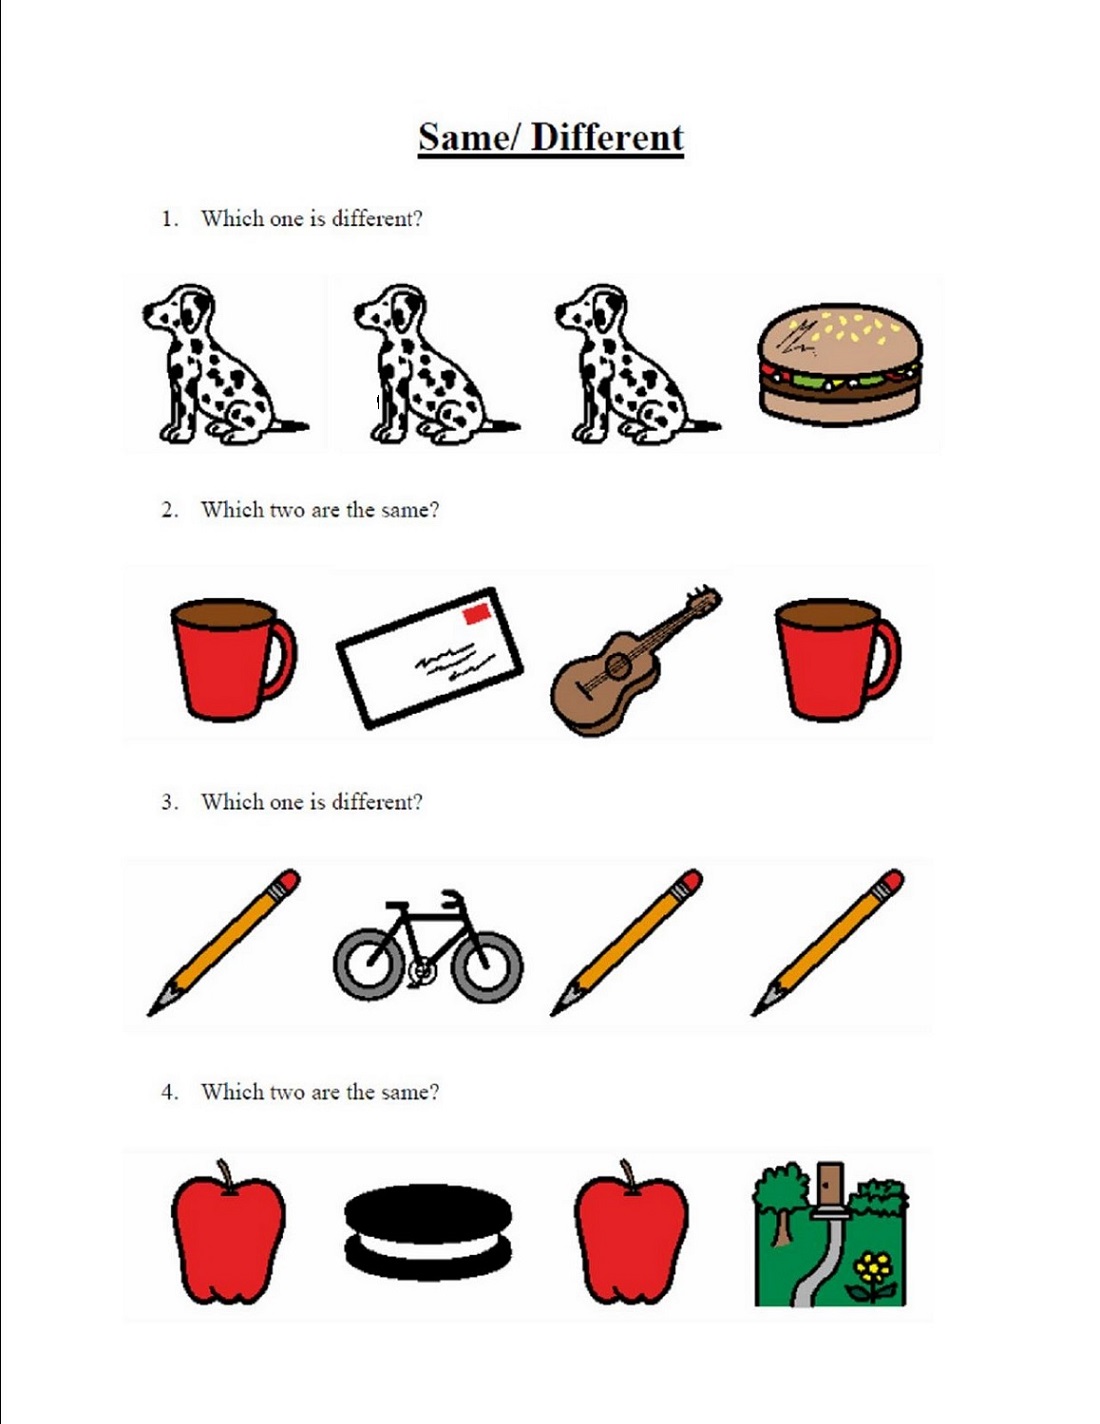 Same And Different Worksheets for Kids